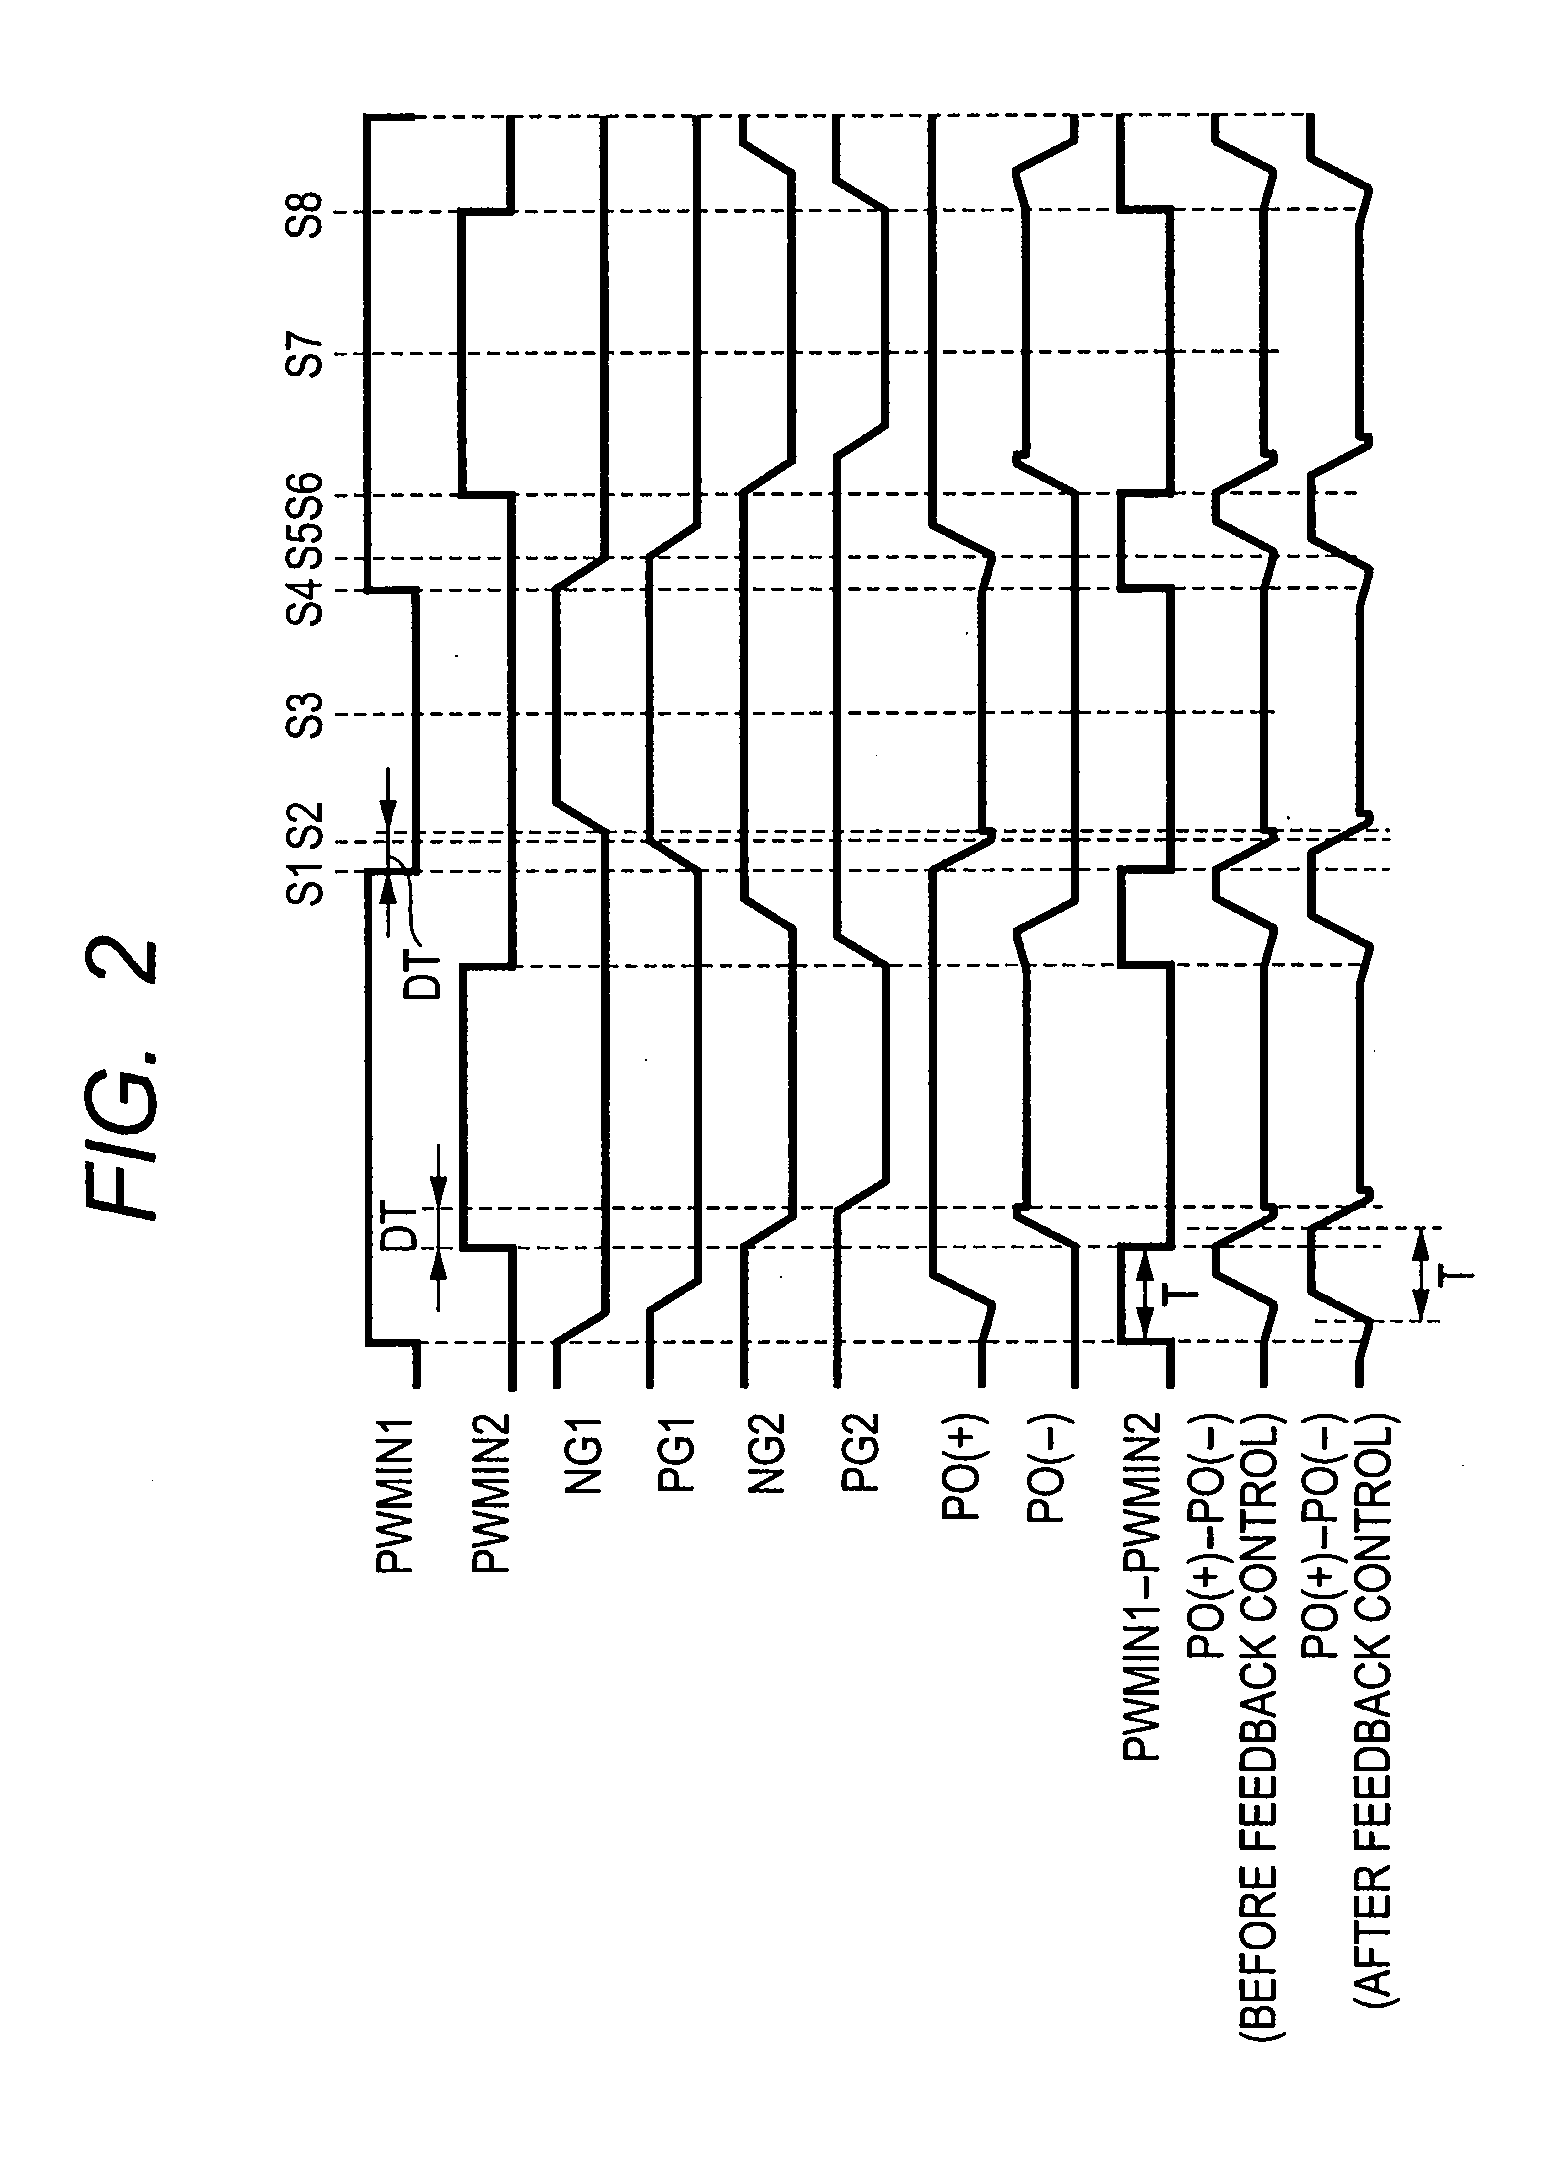 Pulse width modulation circuit and voltage-feedback class-d amplifier circuit